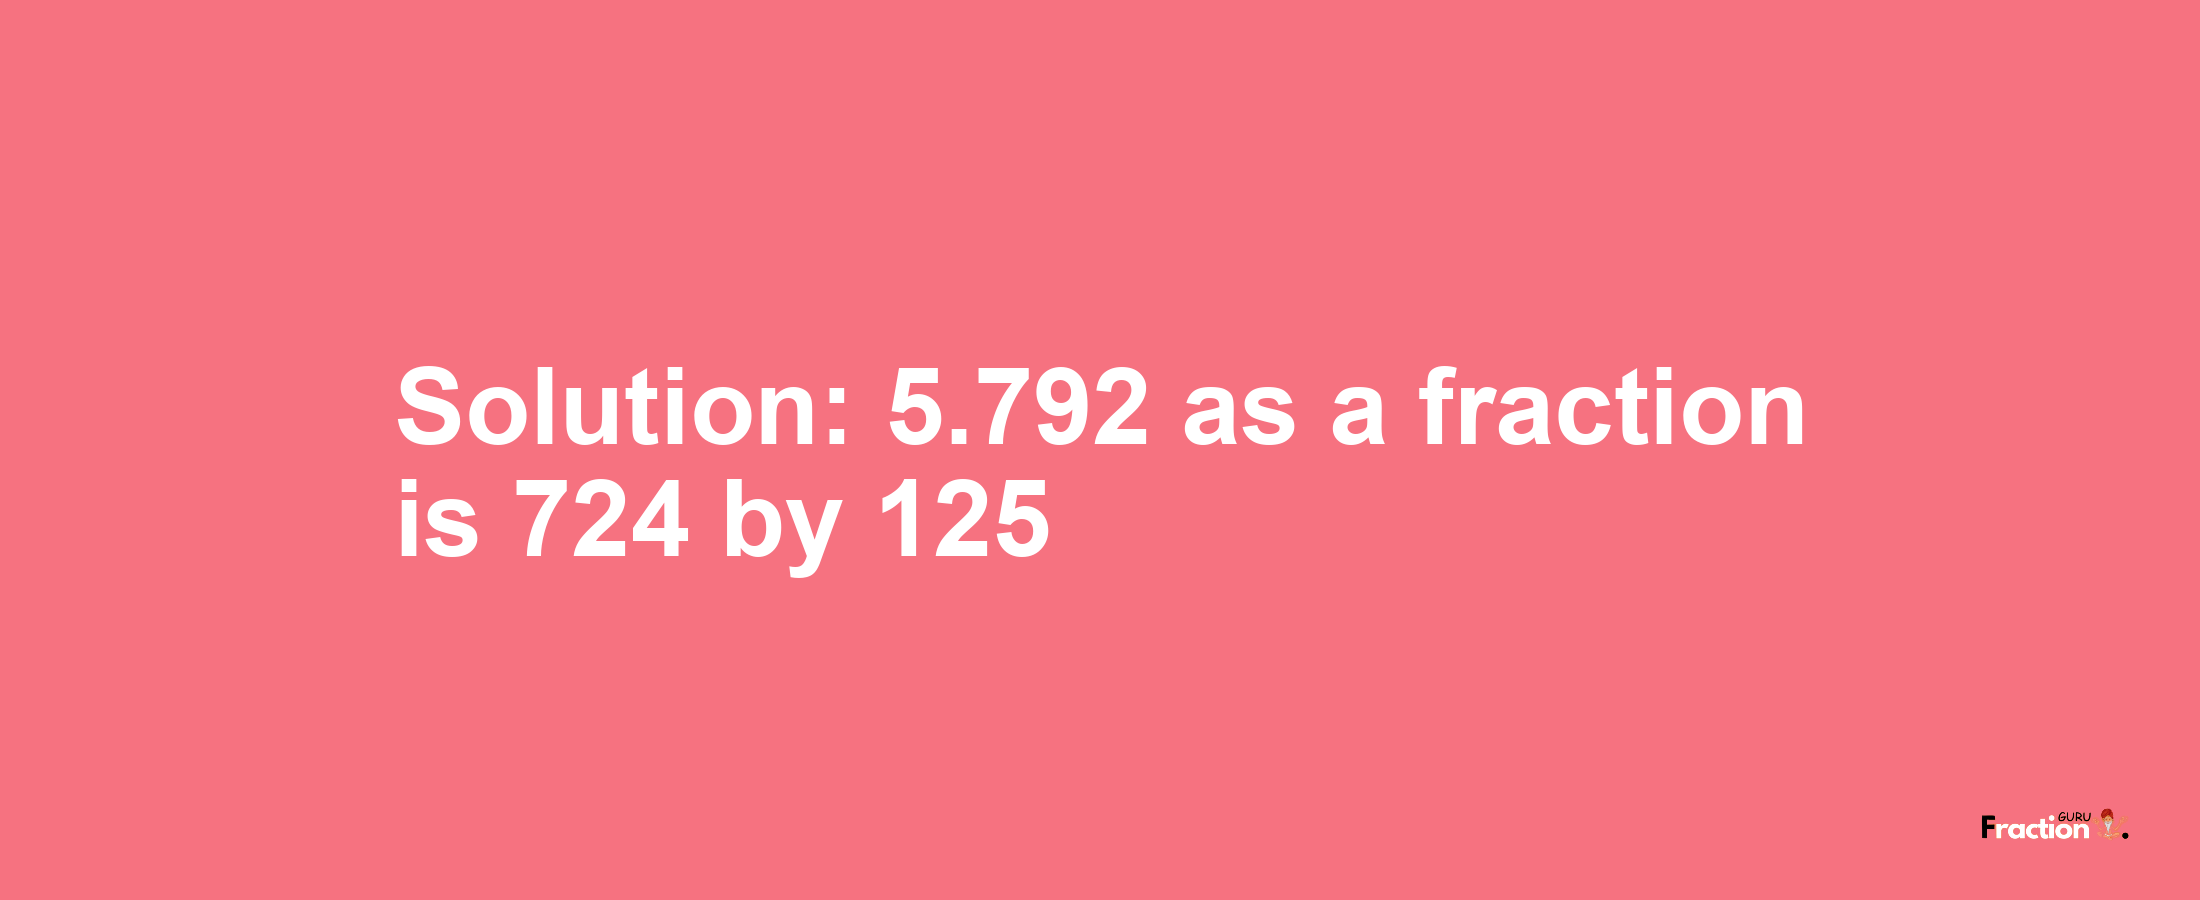 Solution:5.792 as a fraction is 724/125